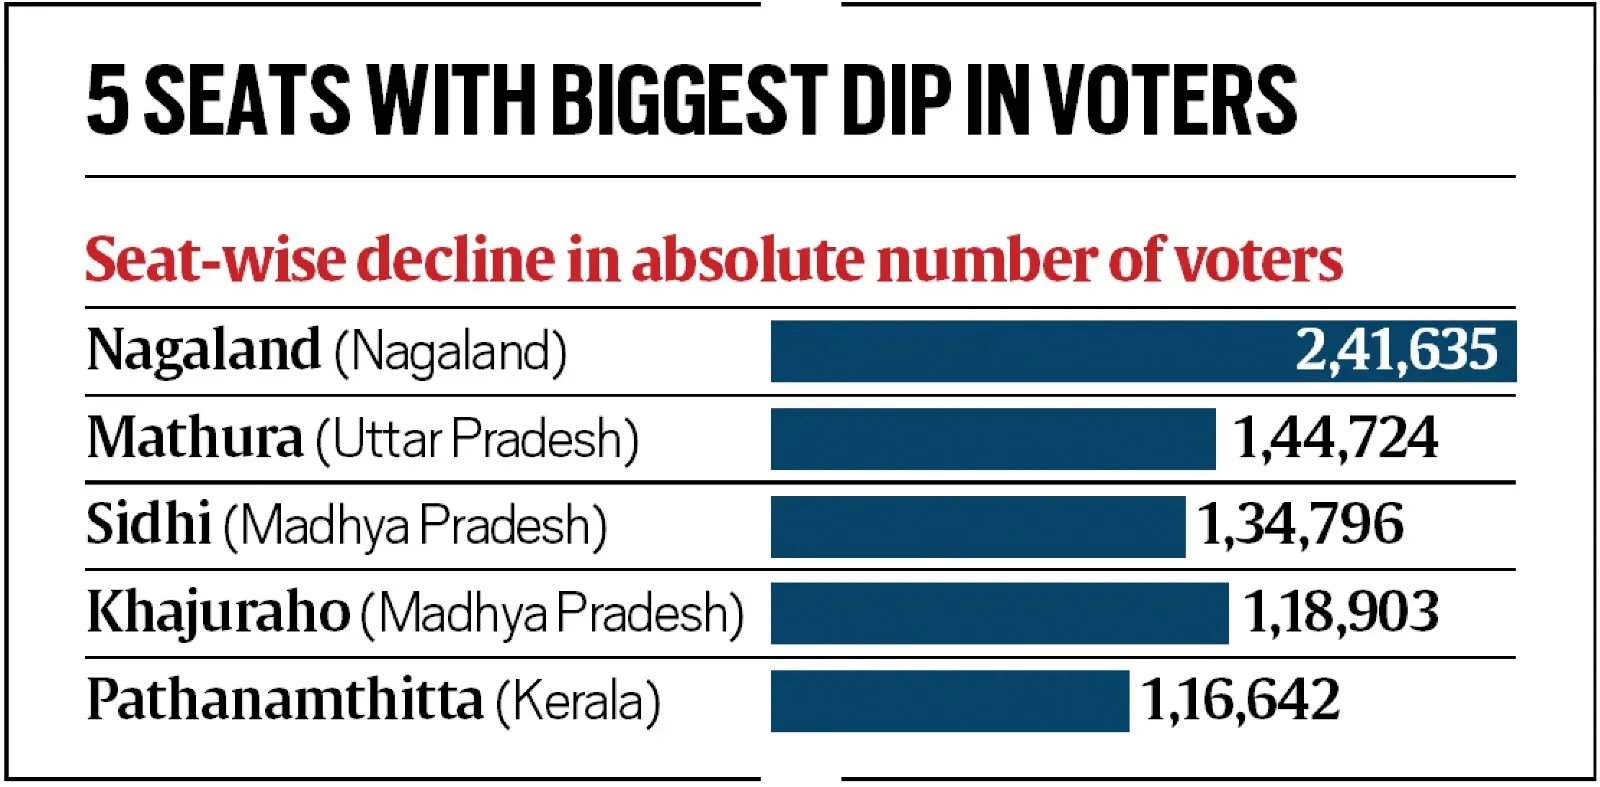 5 states with biggest dip in voters